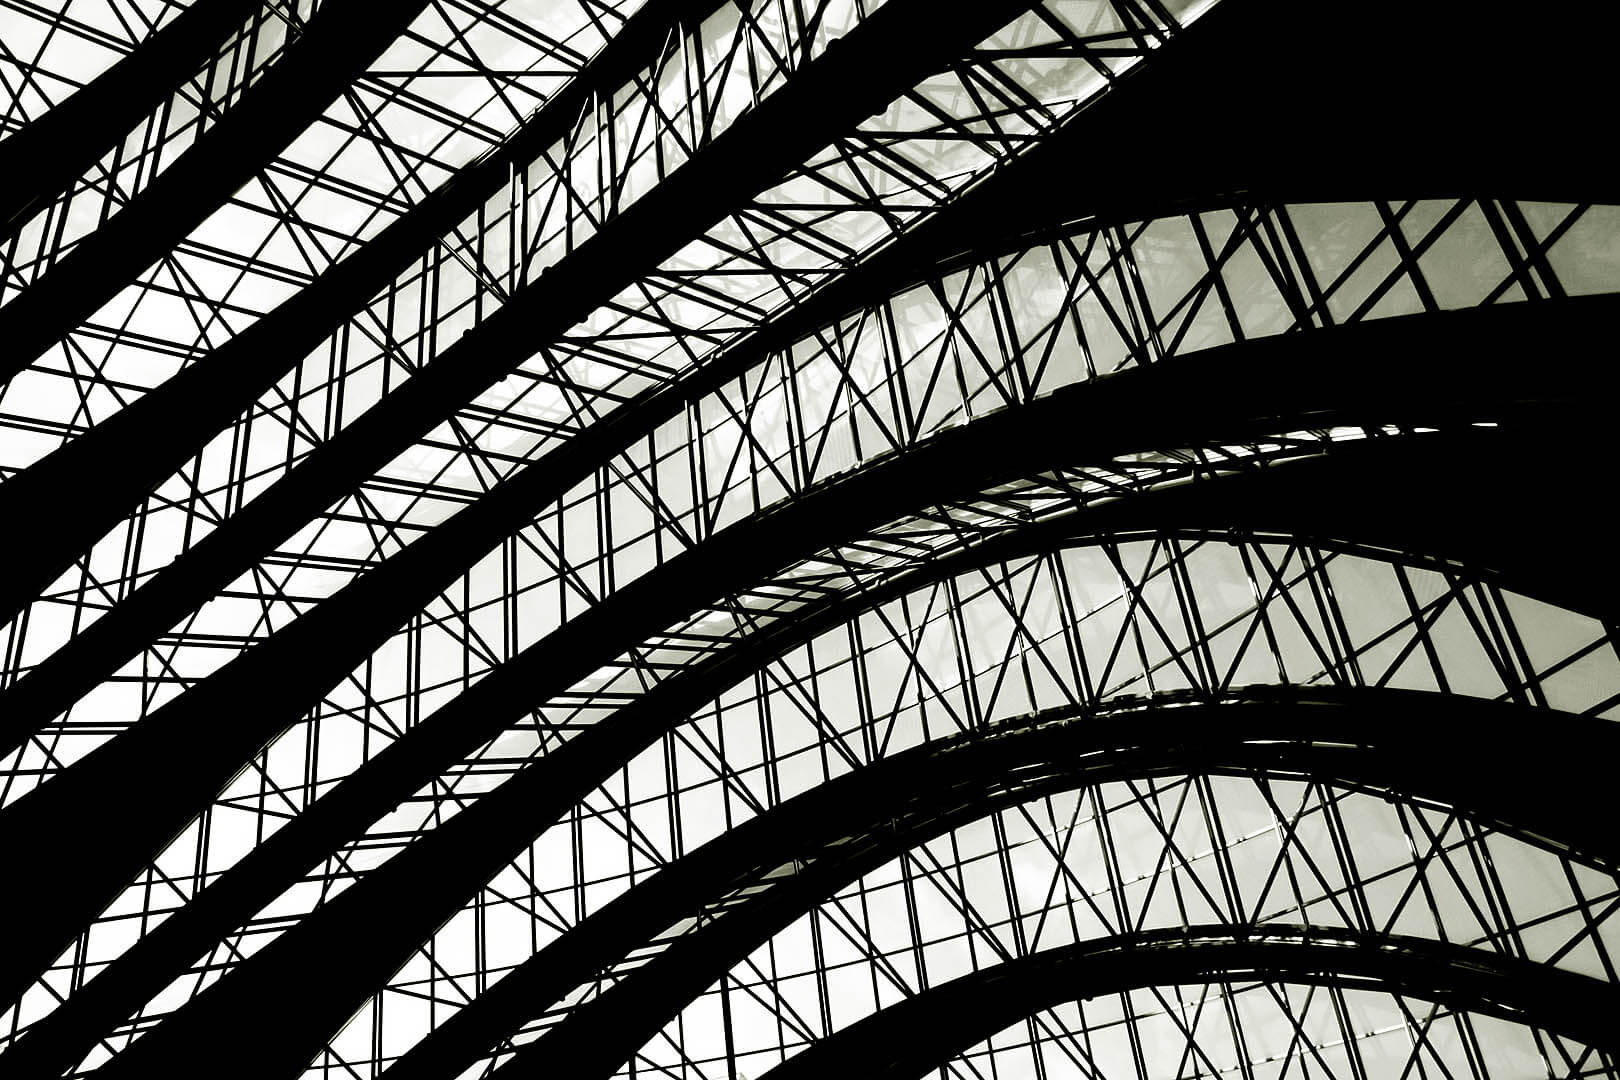 Canary DLR Station Roof